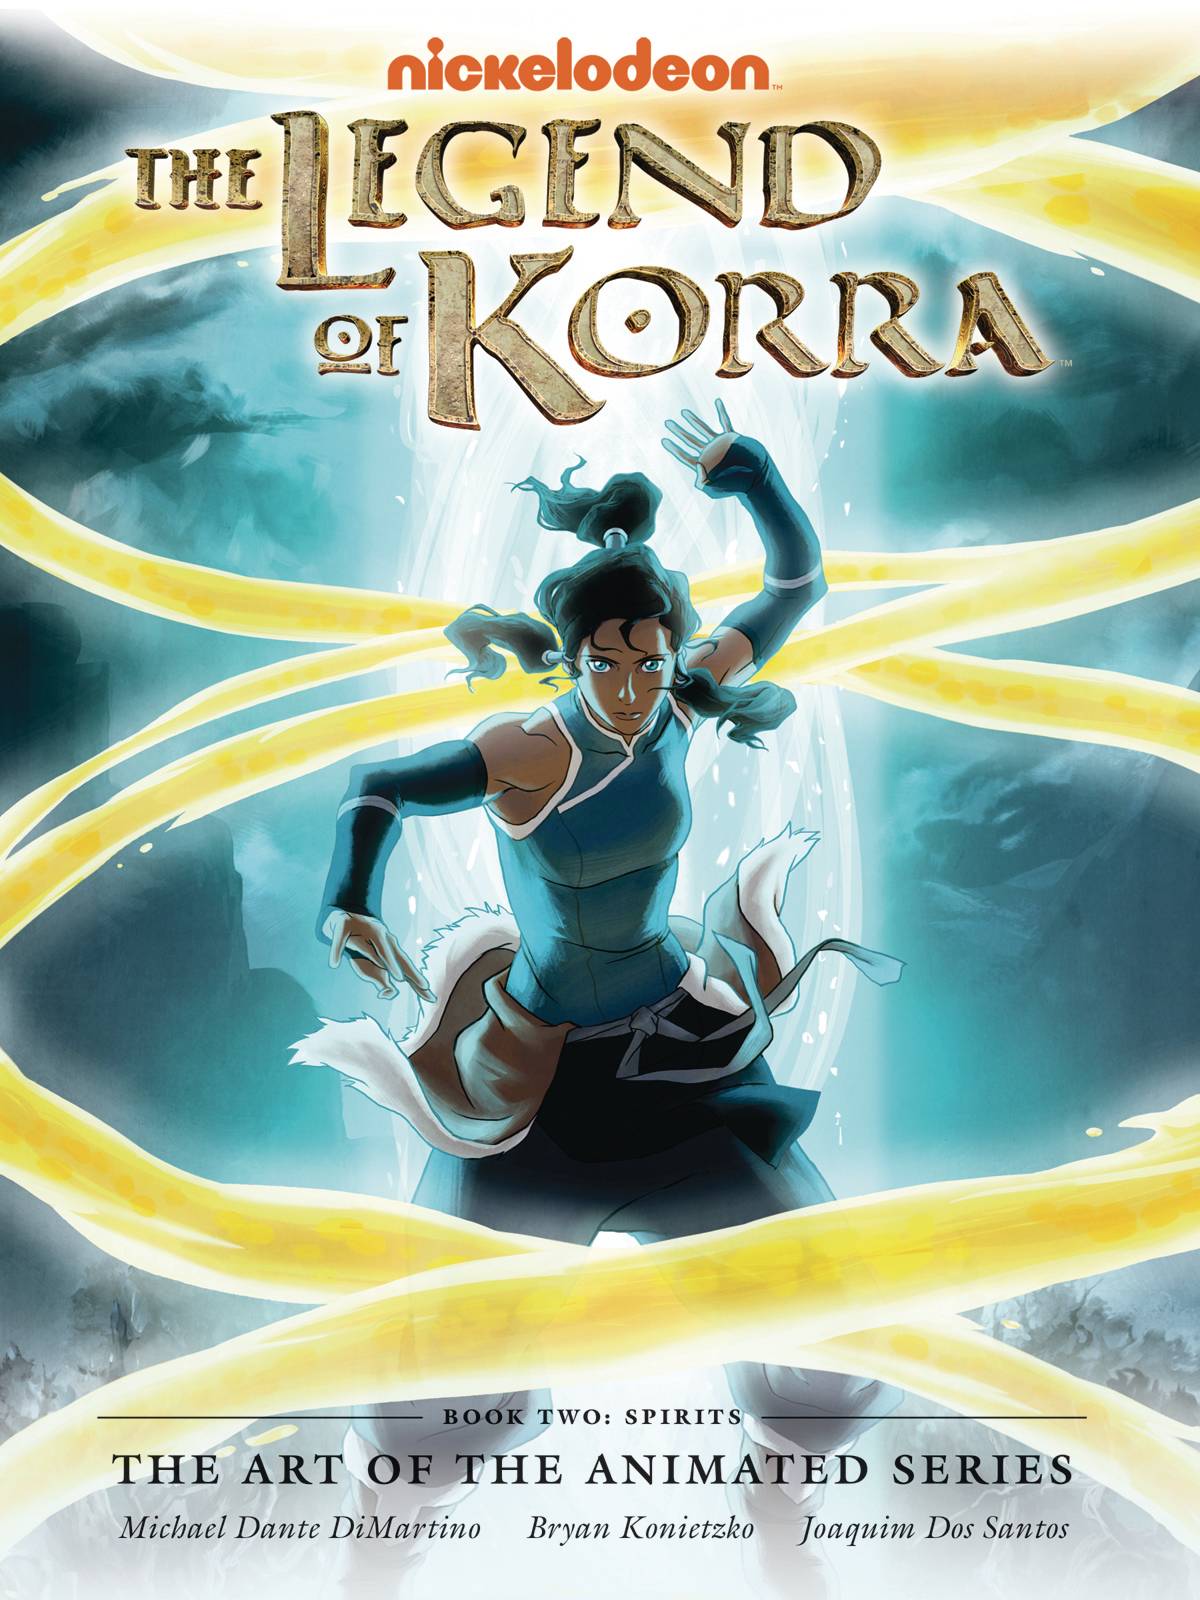 Legend Korra Art of the Animated Series Deluxe Ed Book 2 Spirits Second Edition with Slipcase